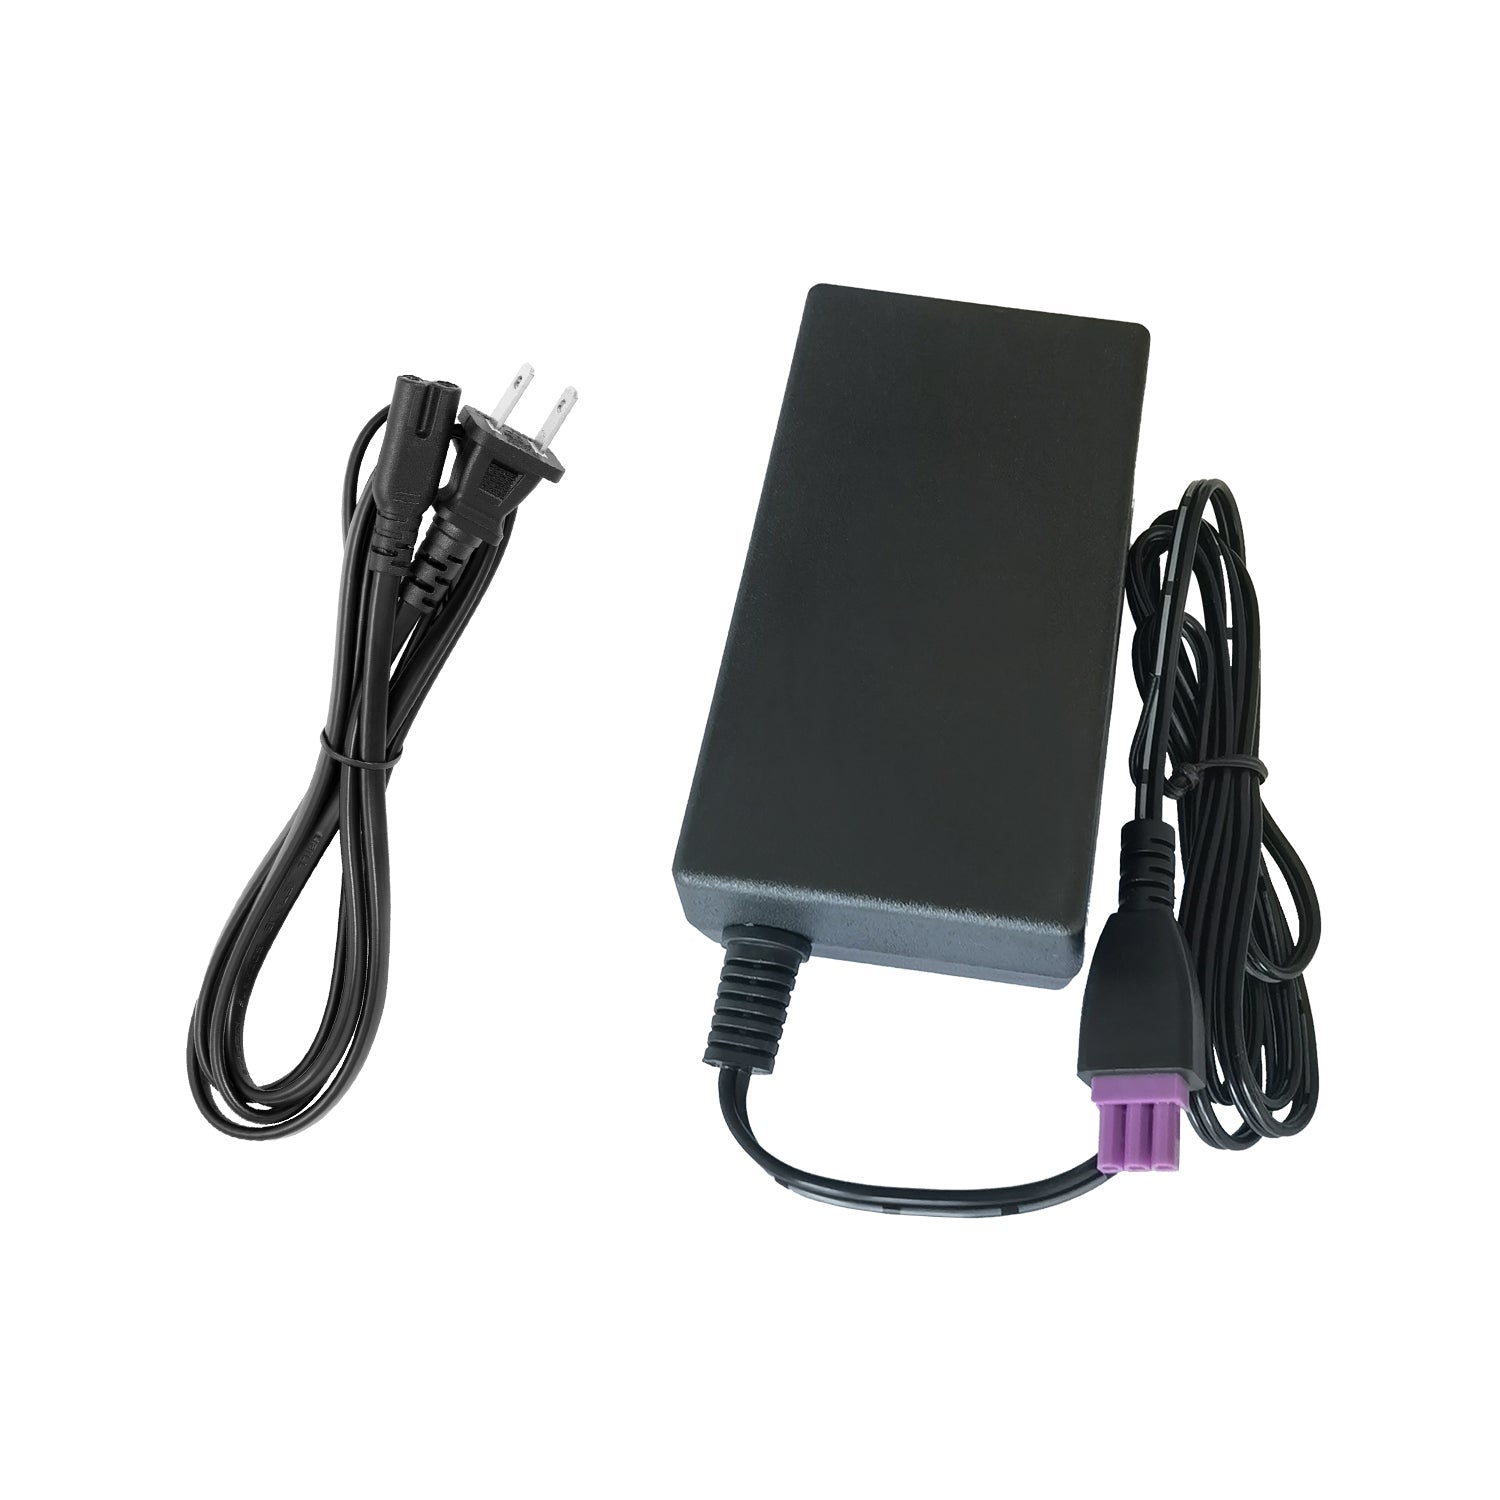 Power Adapter for HP Photosmart C4680 All-in-One Printer.